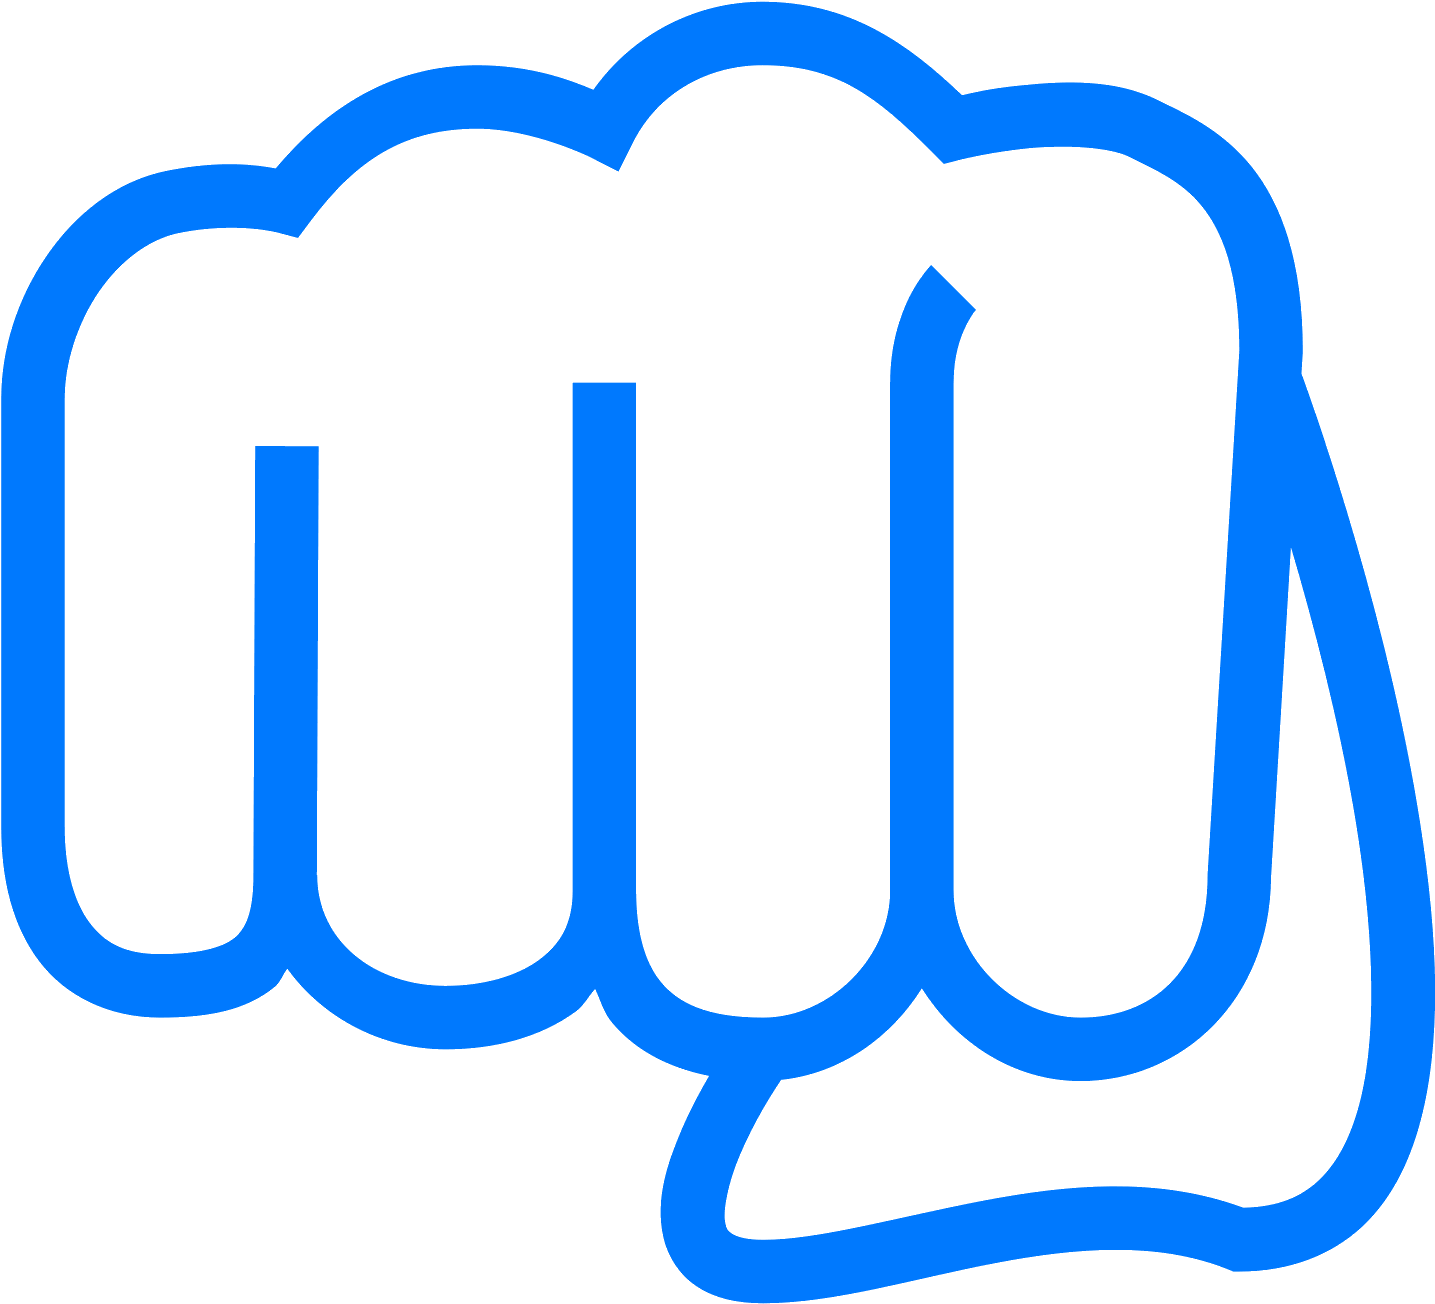 A Blue Fist With Black Background